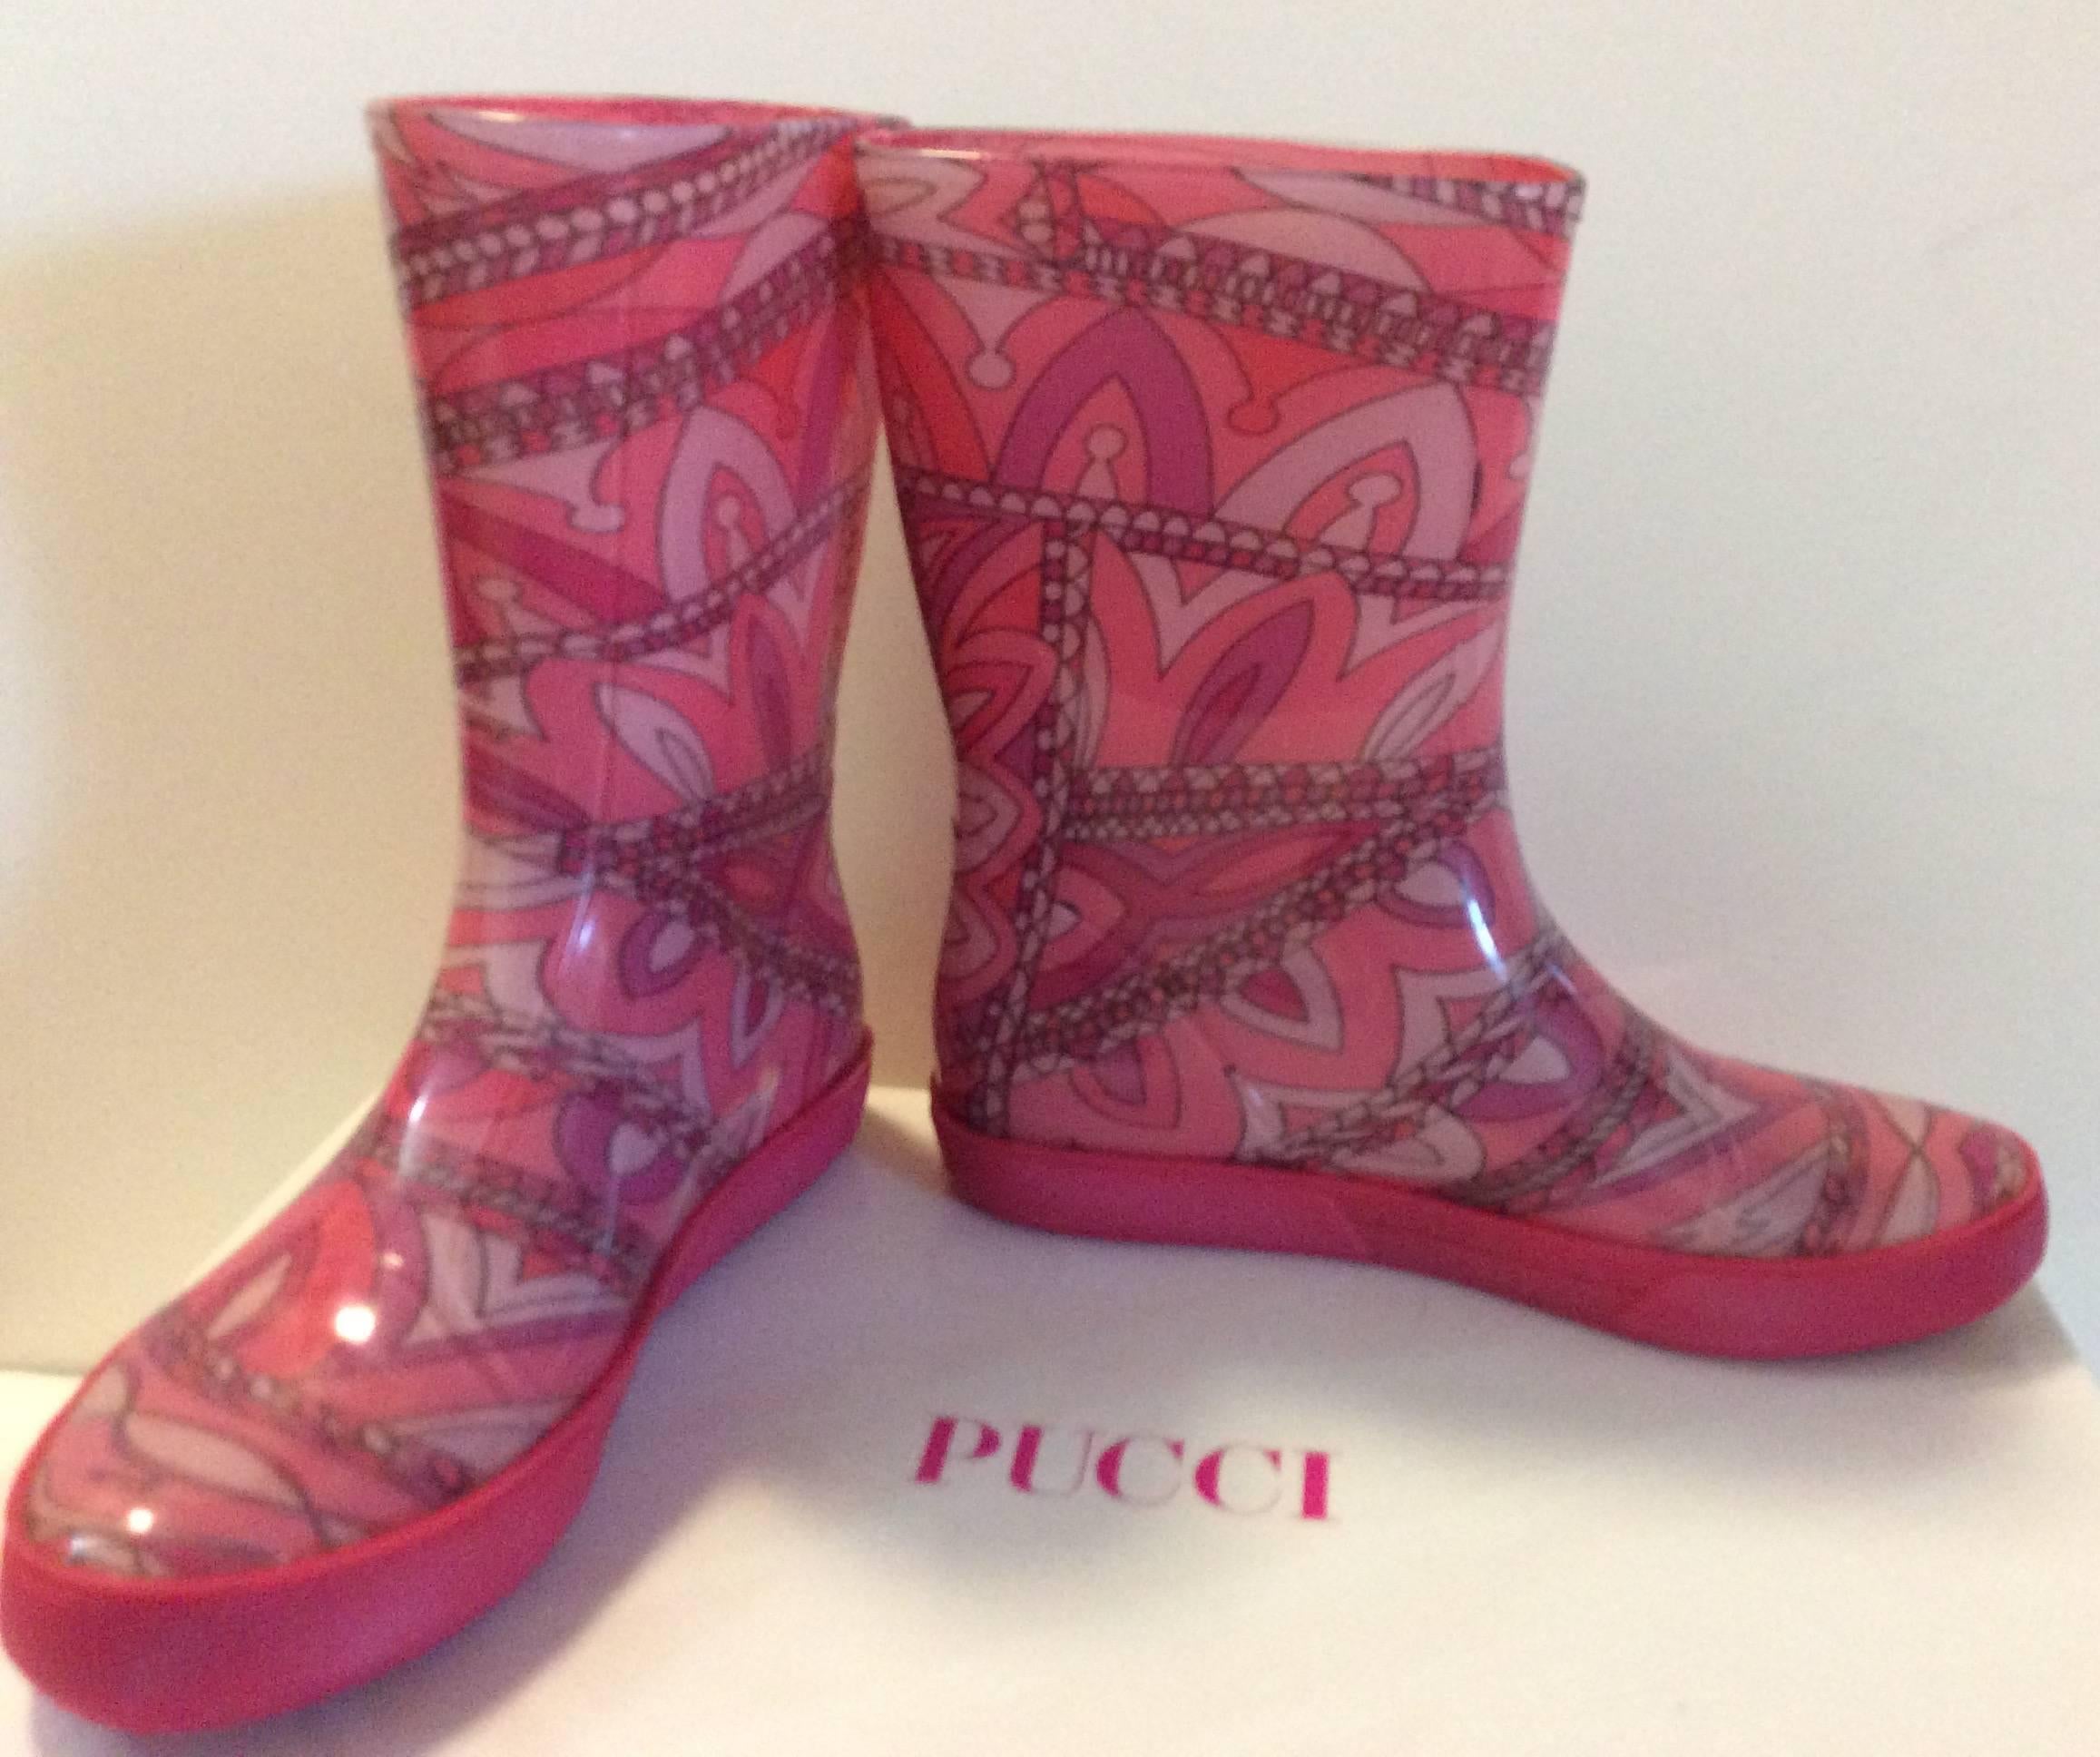 Pink New Emilio Pucci Rain Boots - Size 37 or 38 For Sale